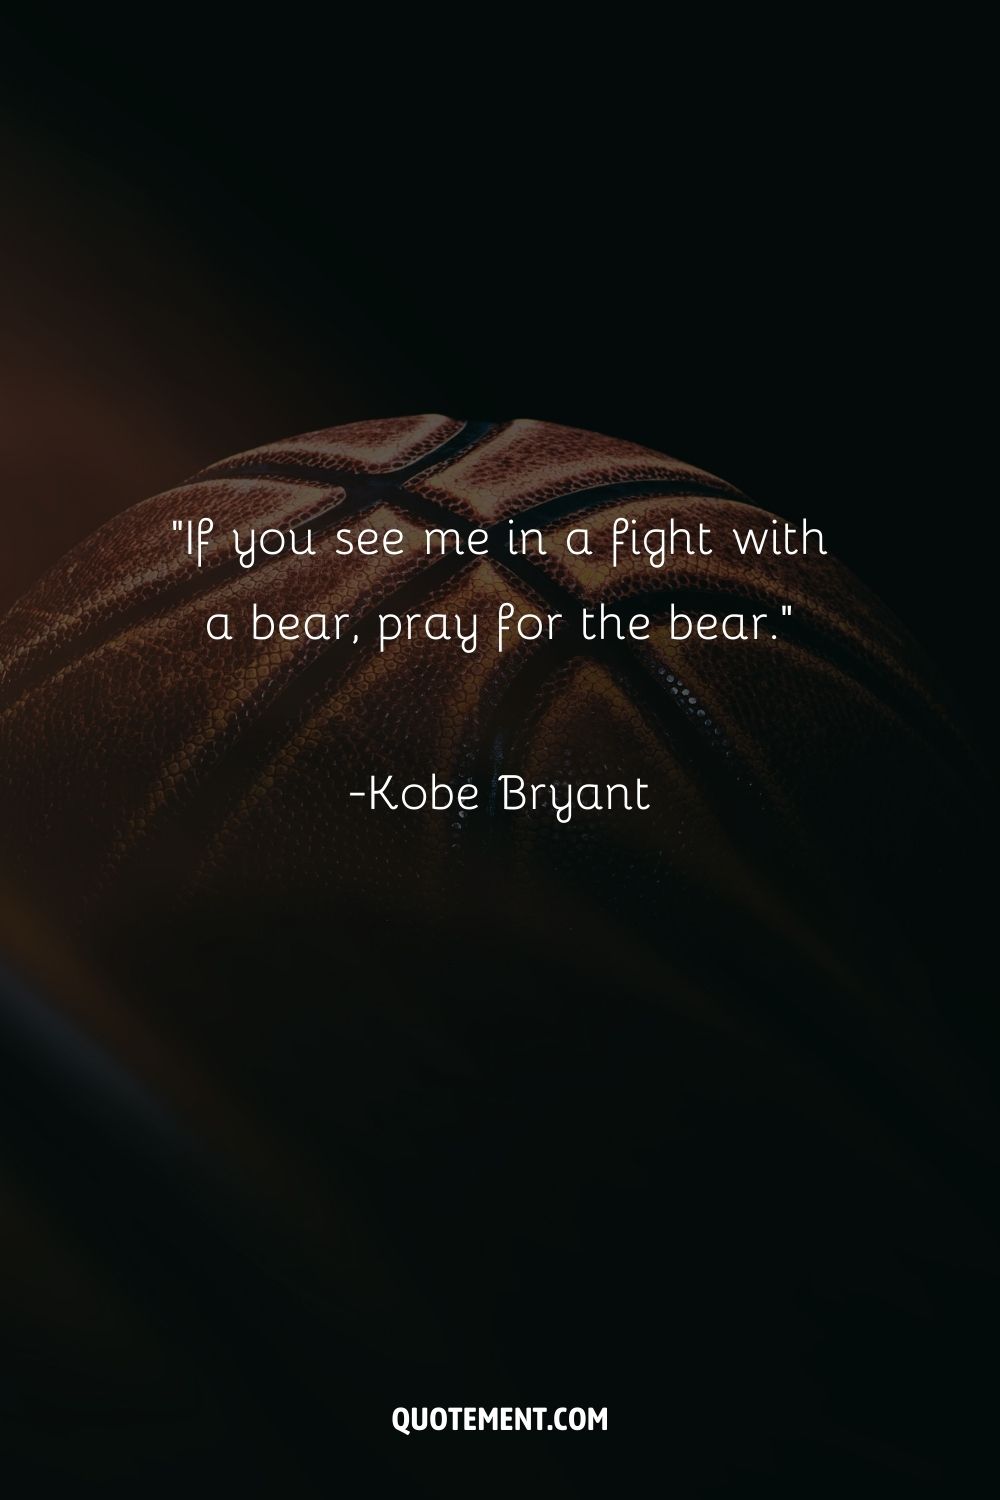 Image of a ball representing a quote from the greatest basketball player.
